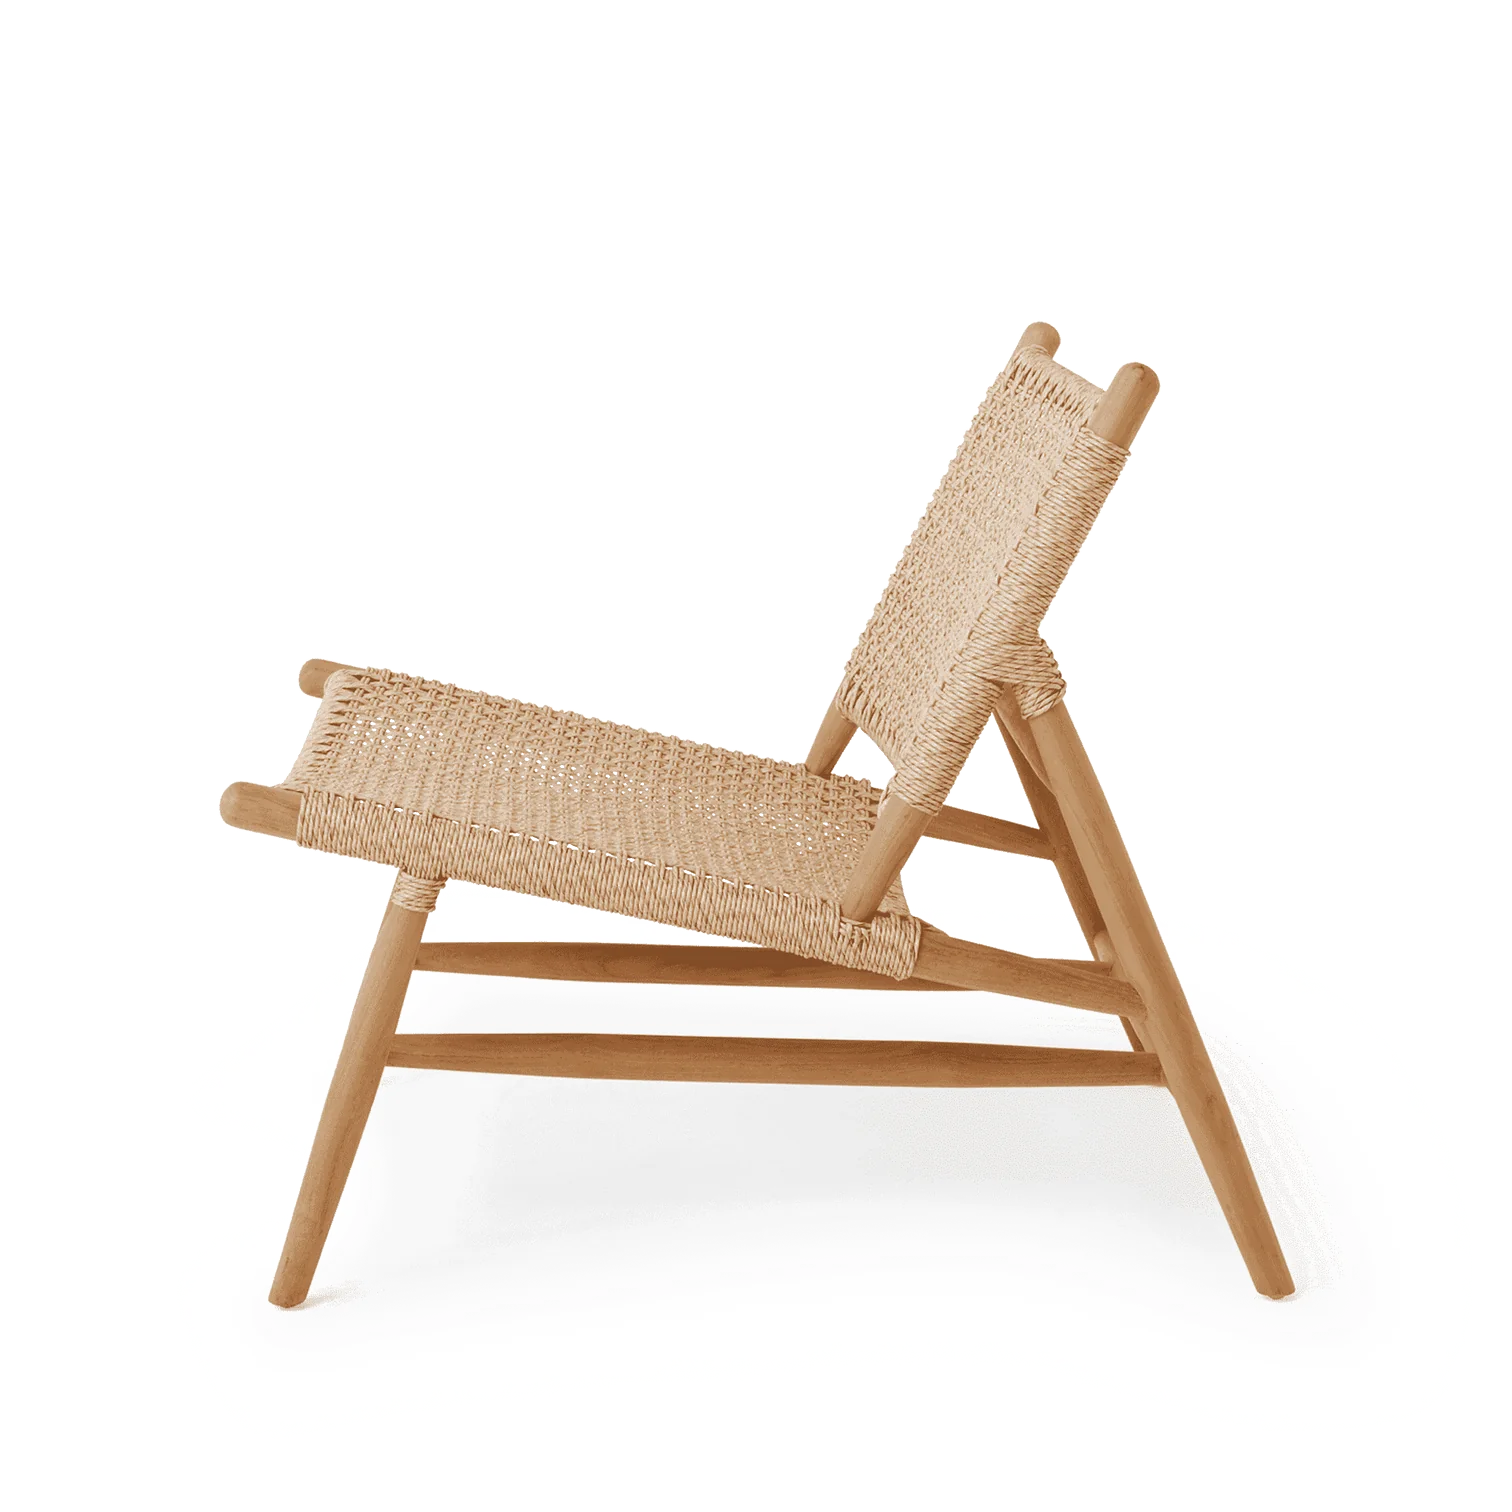 PIER Lounge Outdoor Chair